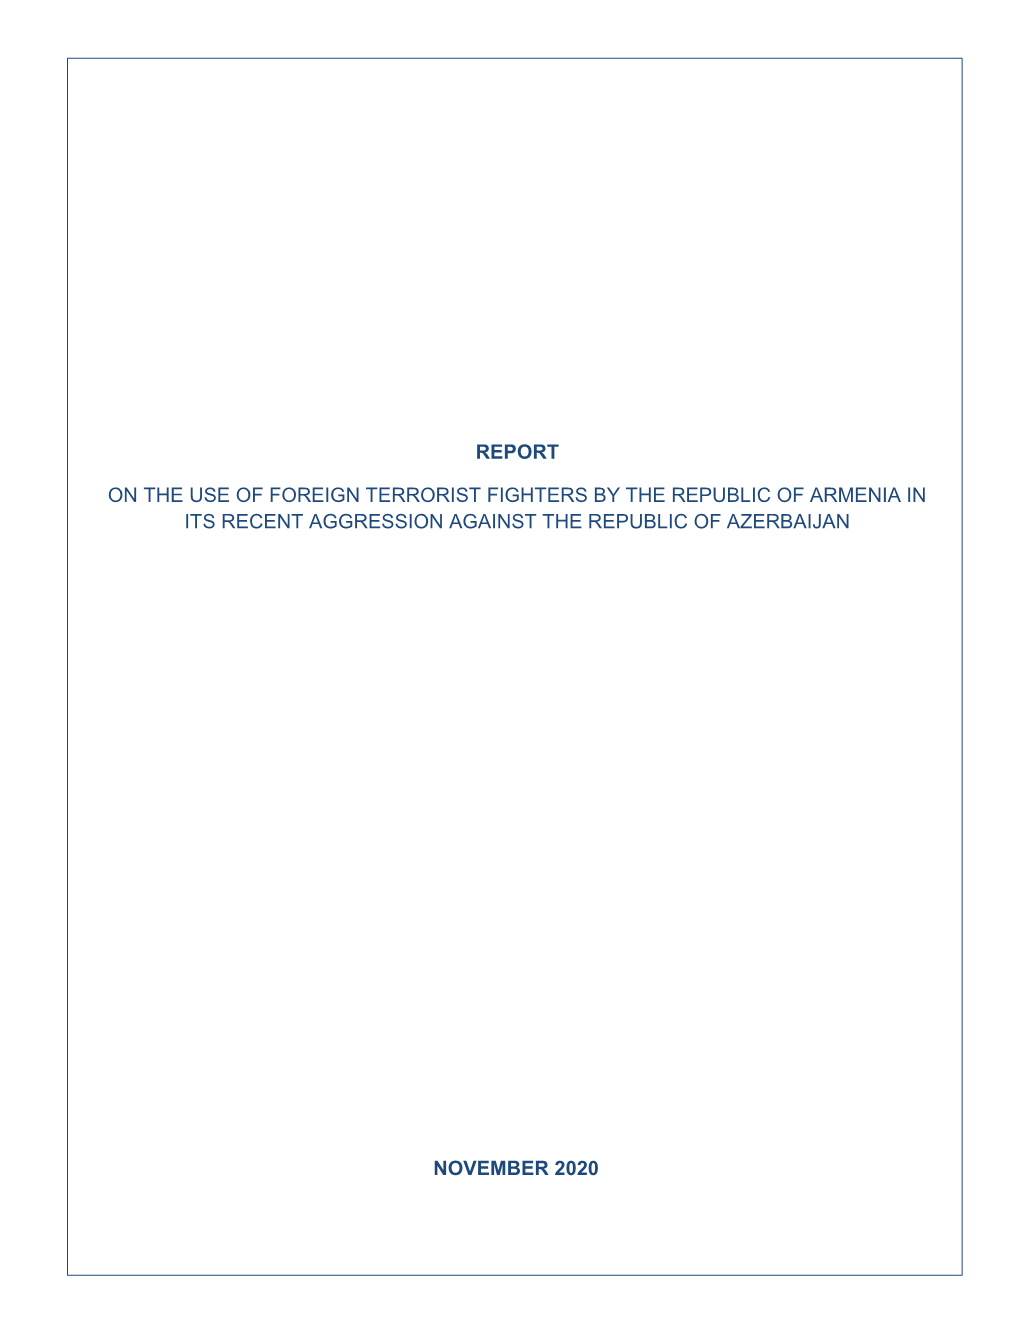 Report on the Use of Foreign Terrorist Fighters by The